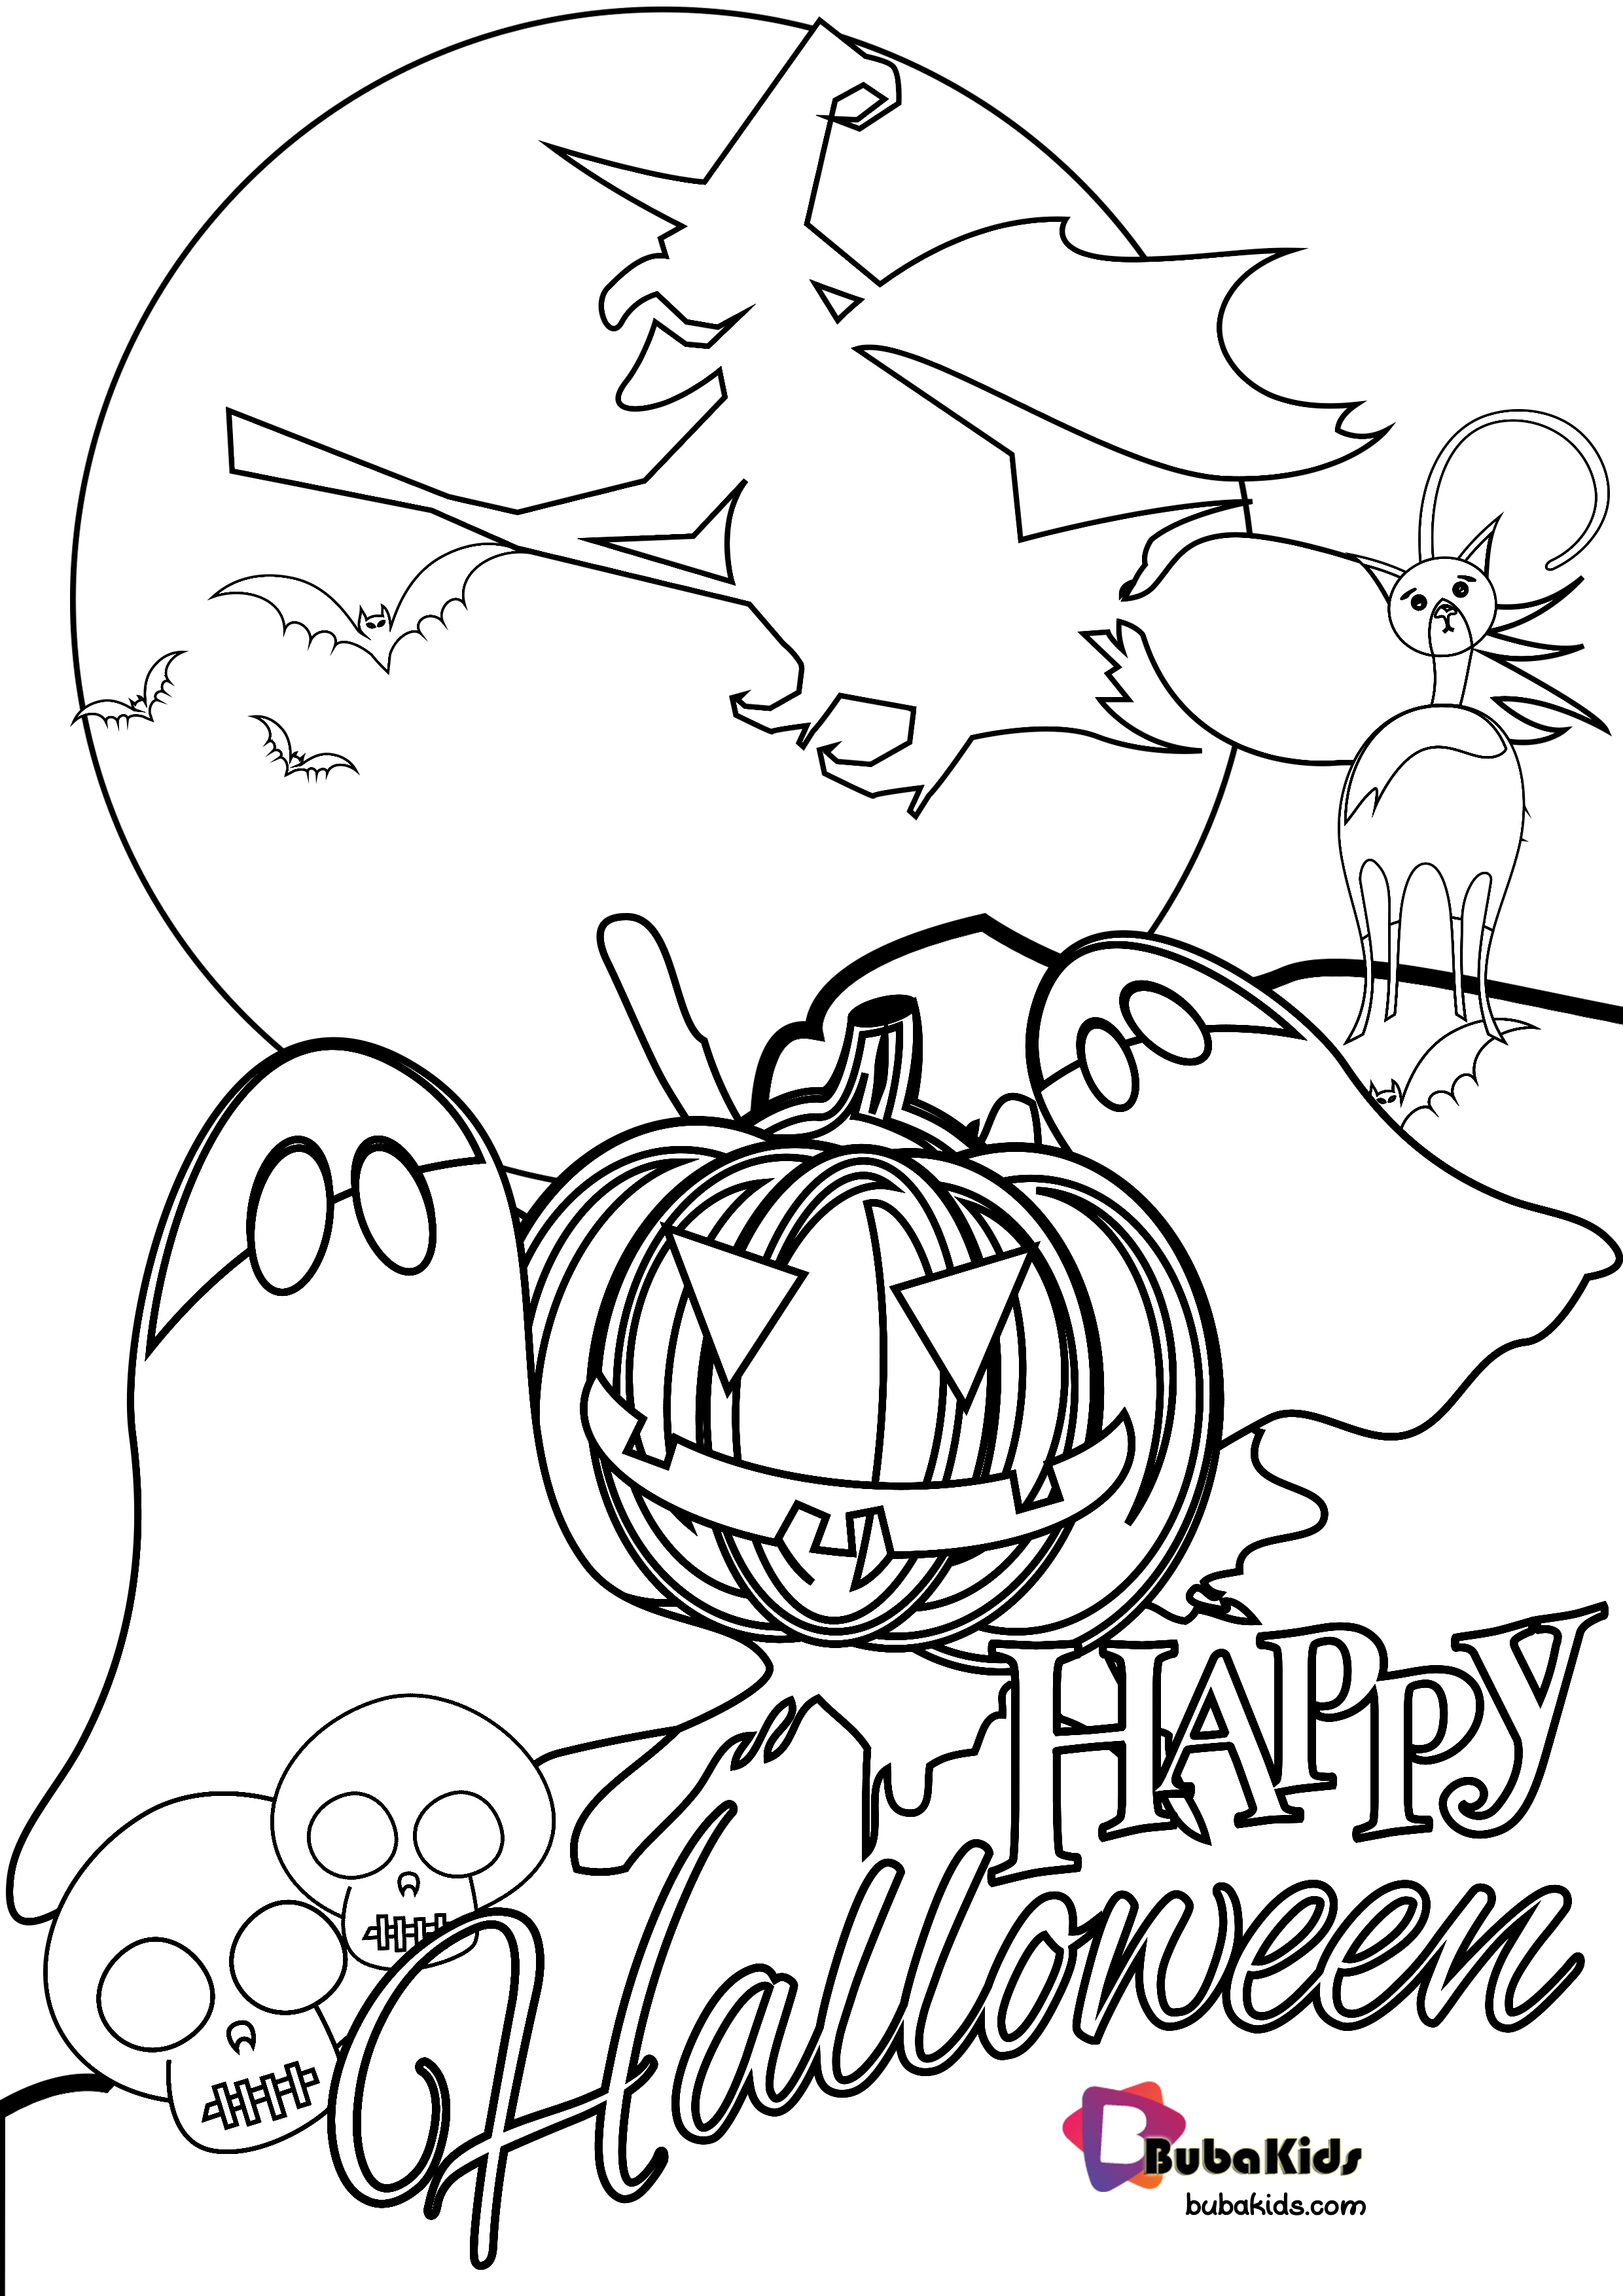 Nightmare Halloween Coloring Pages Wallpaper